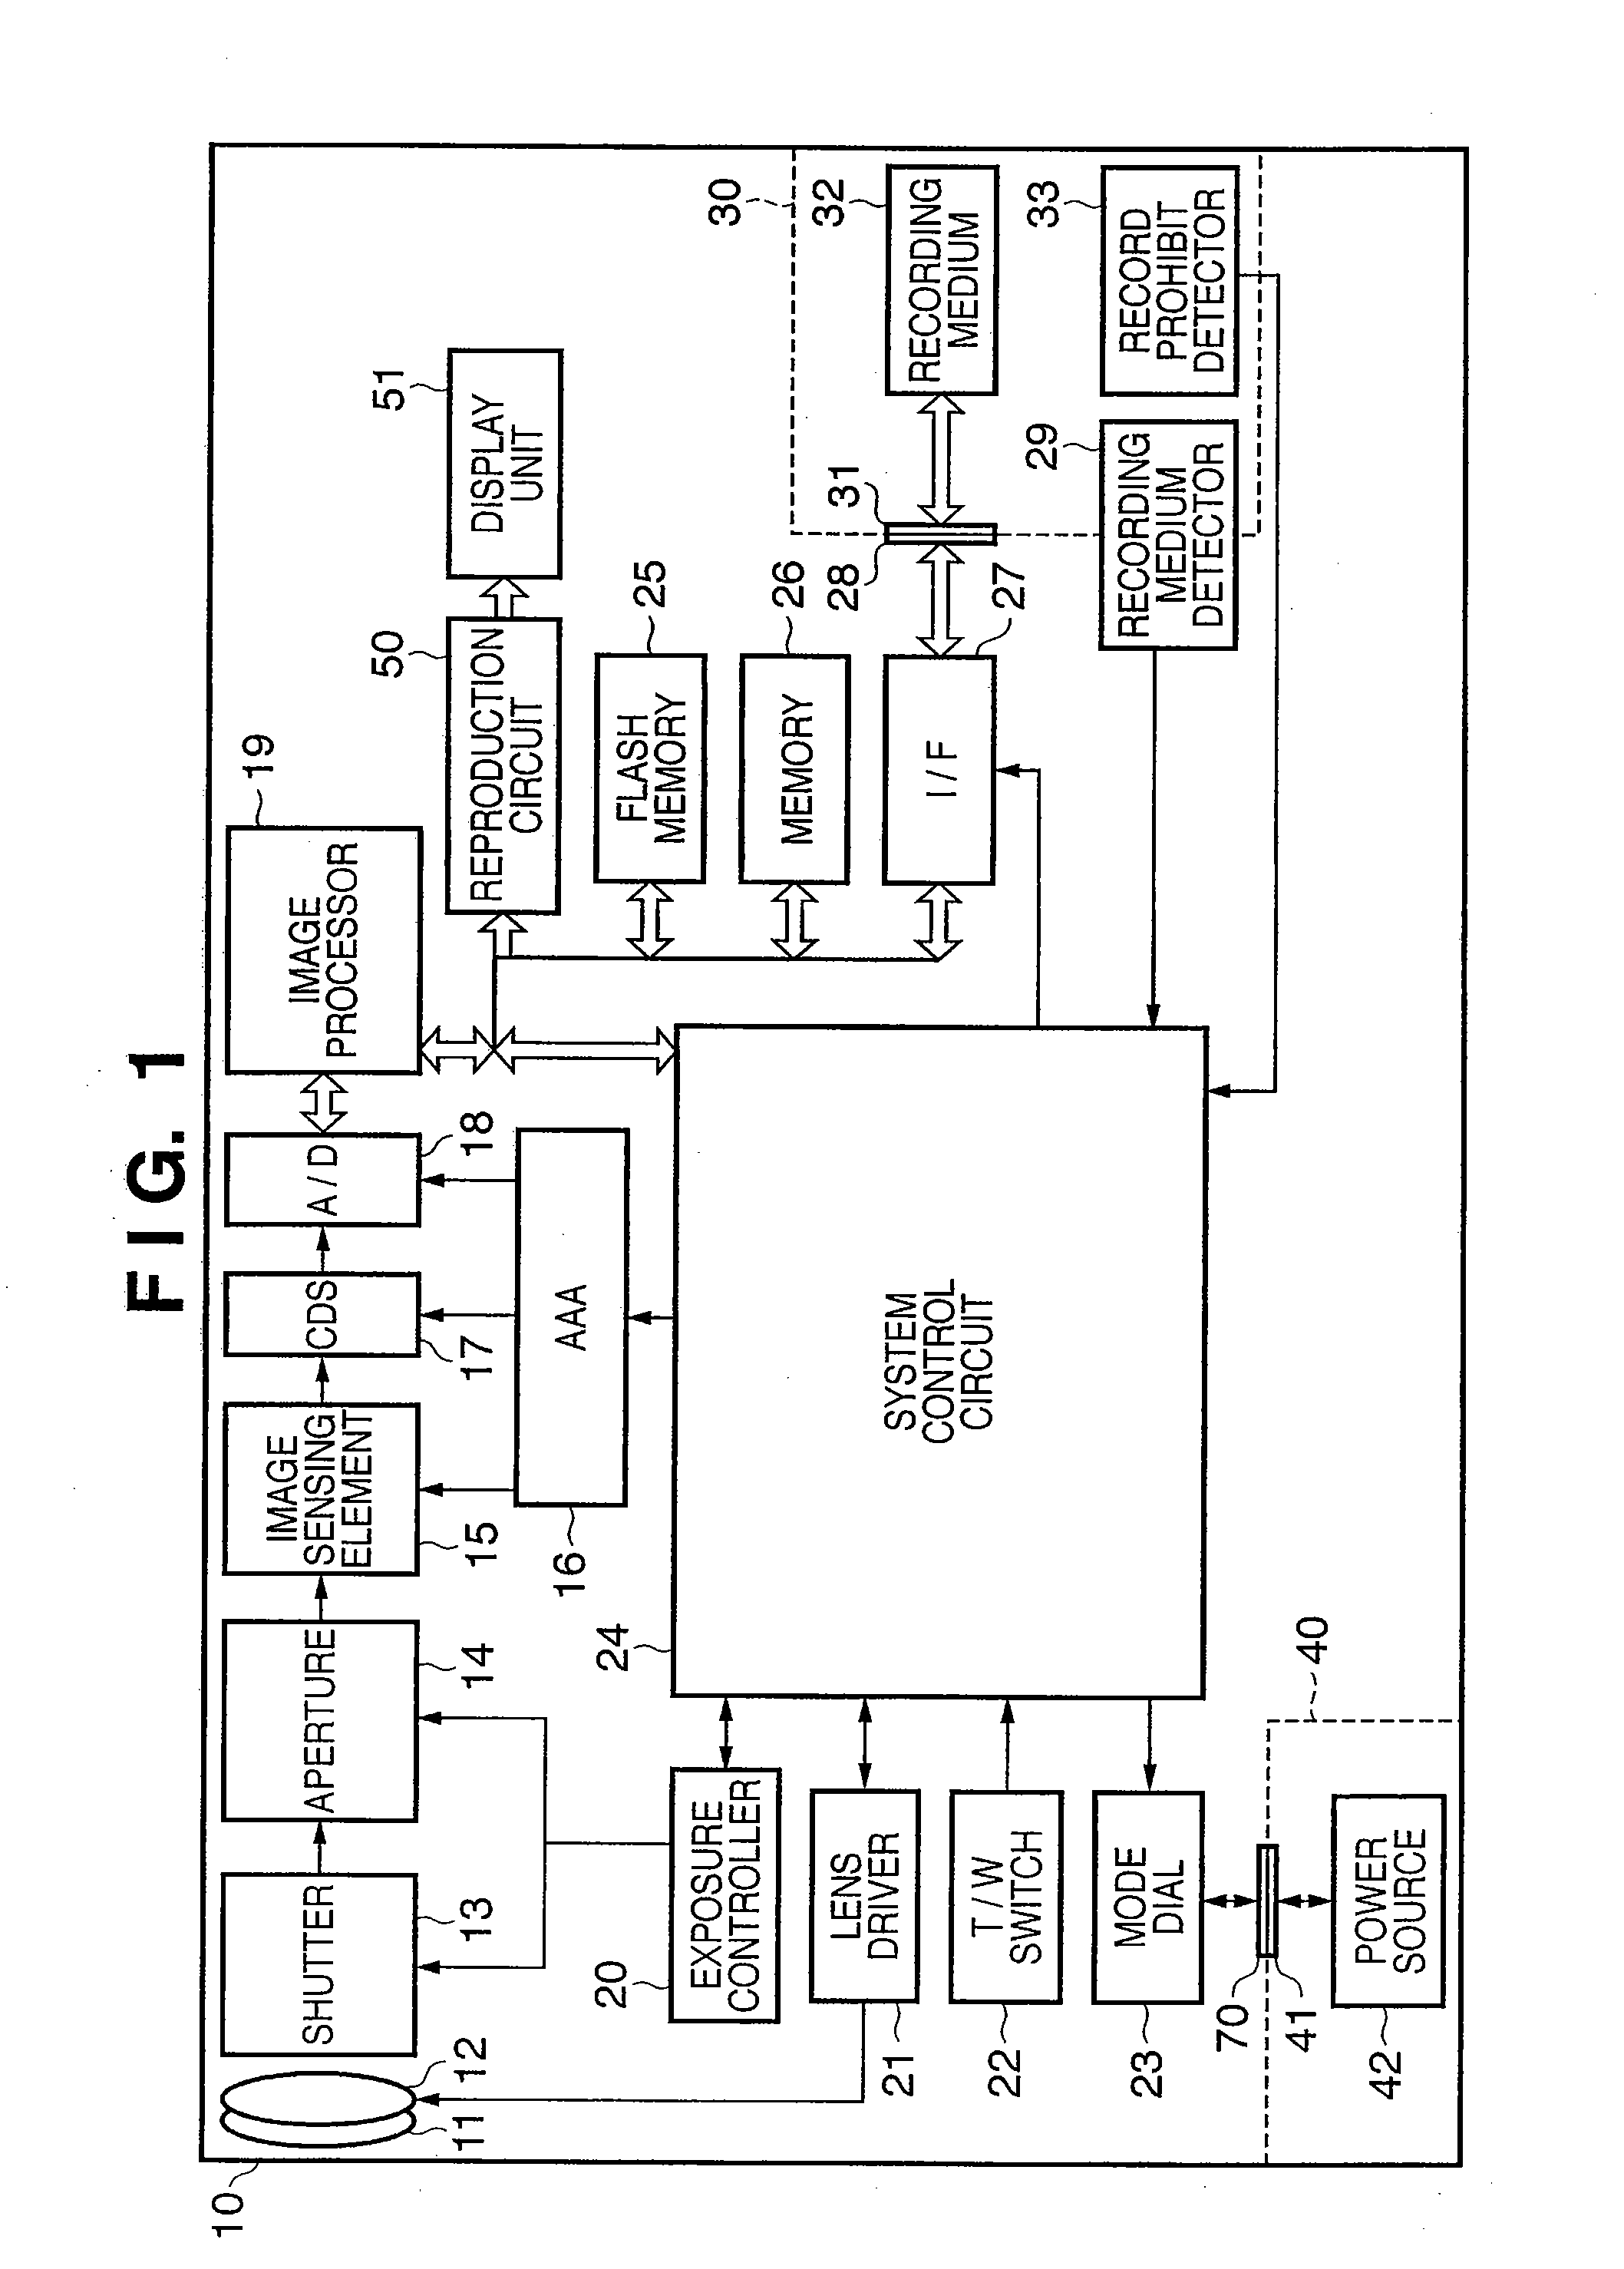 Image sensing apparatus having electronic zoom function, and control method therefor